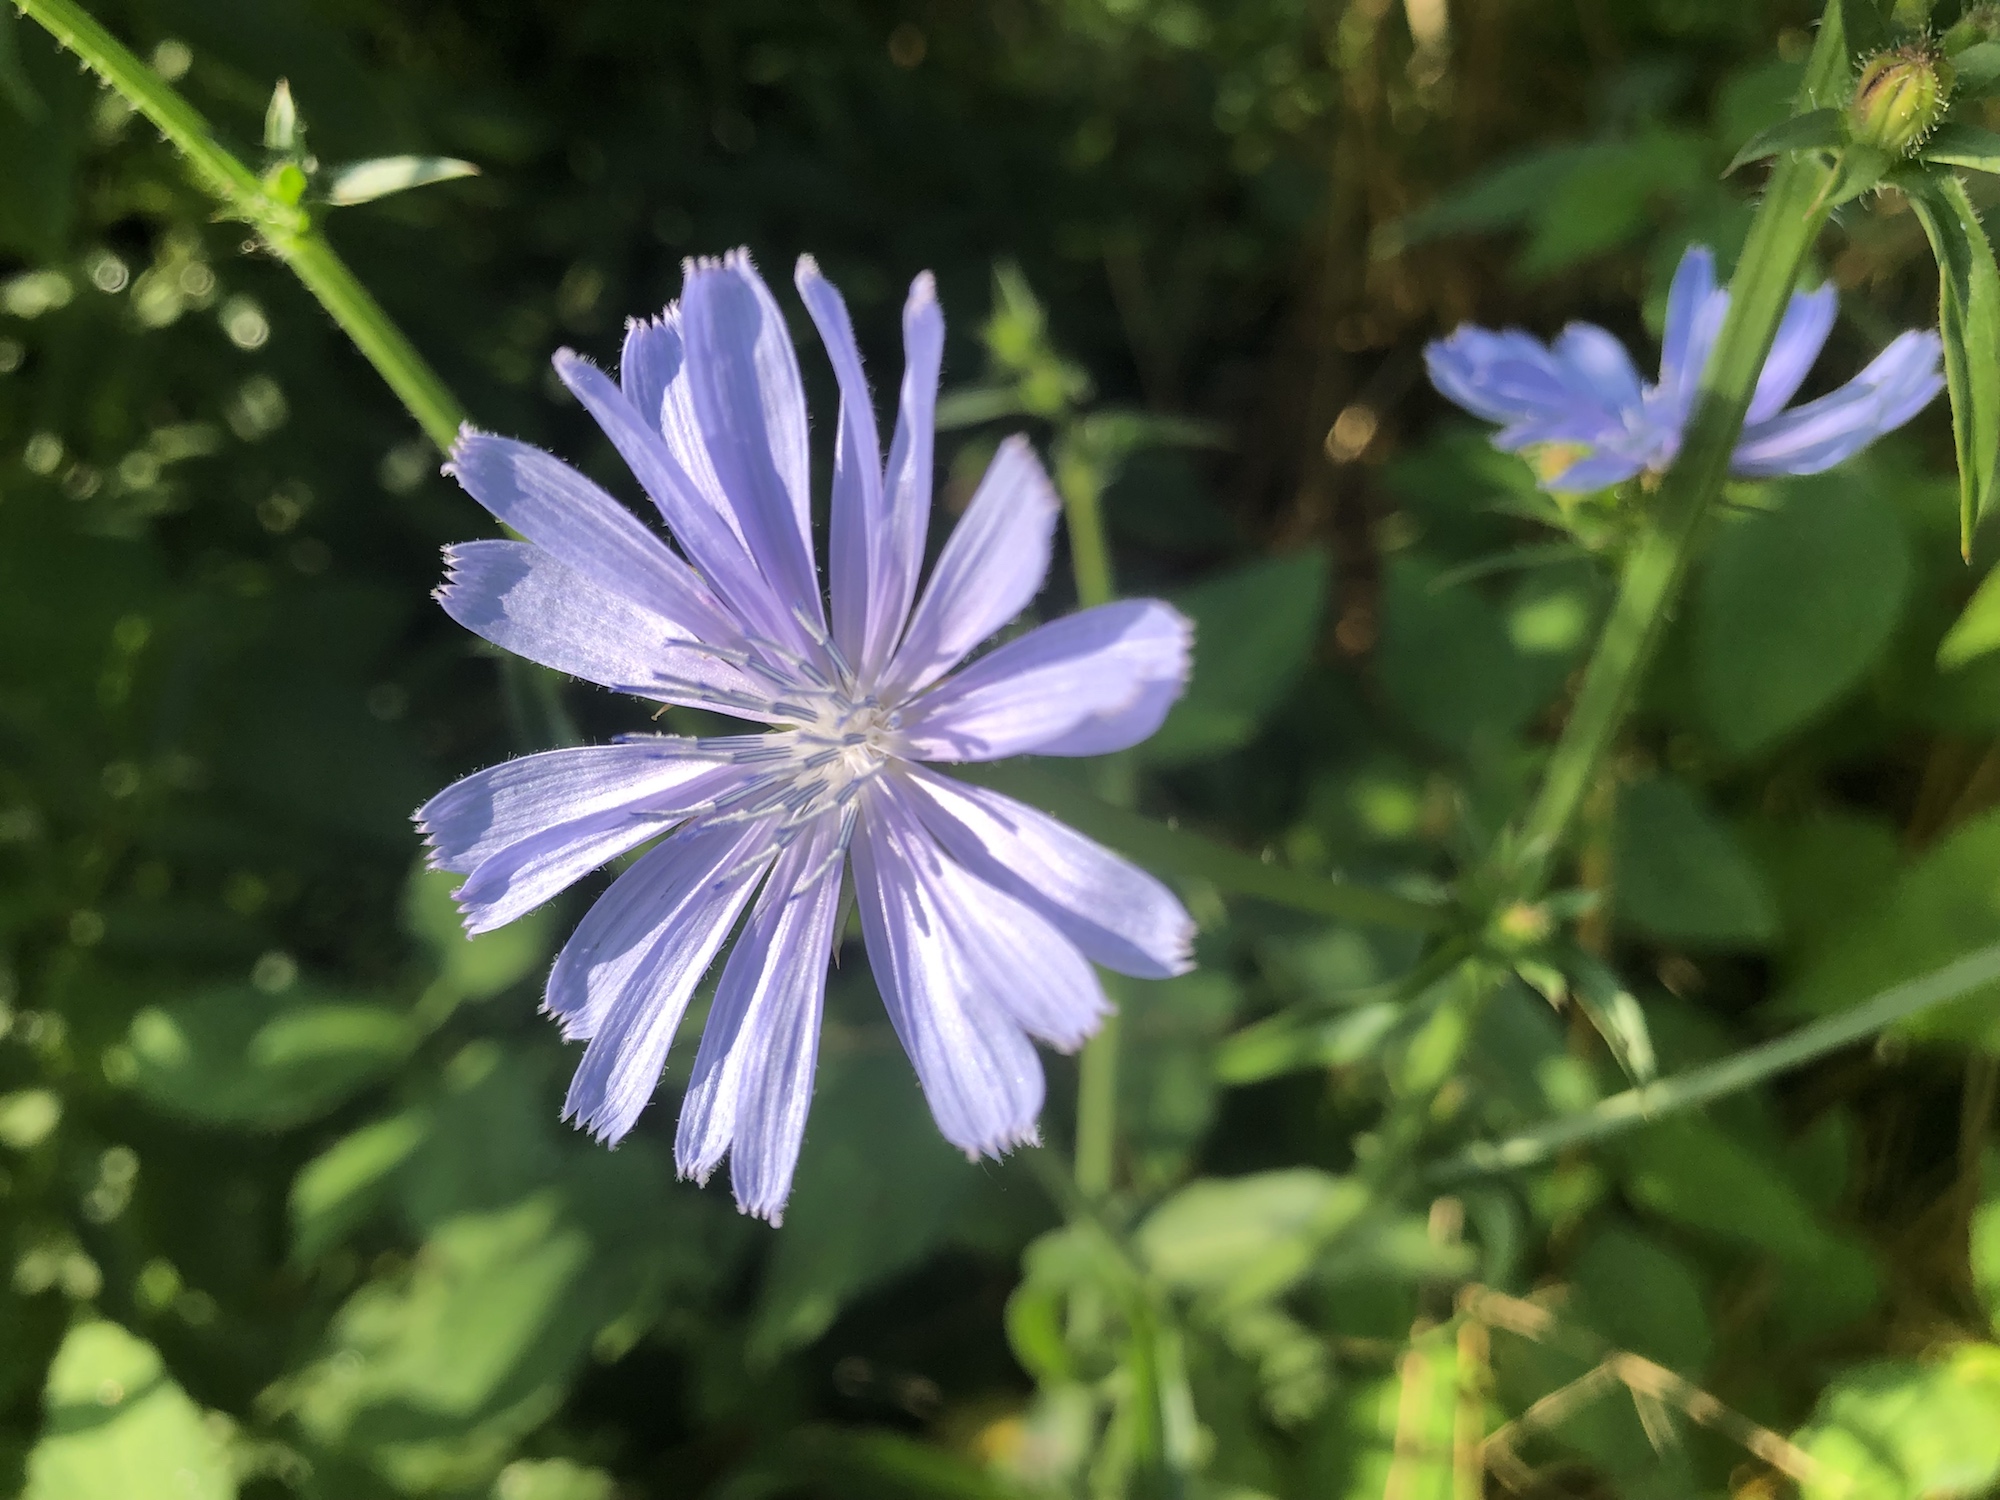 Chicory in Marion Dunn Prairie in Madison, Wisconsin on July 10, 2019.